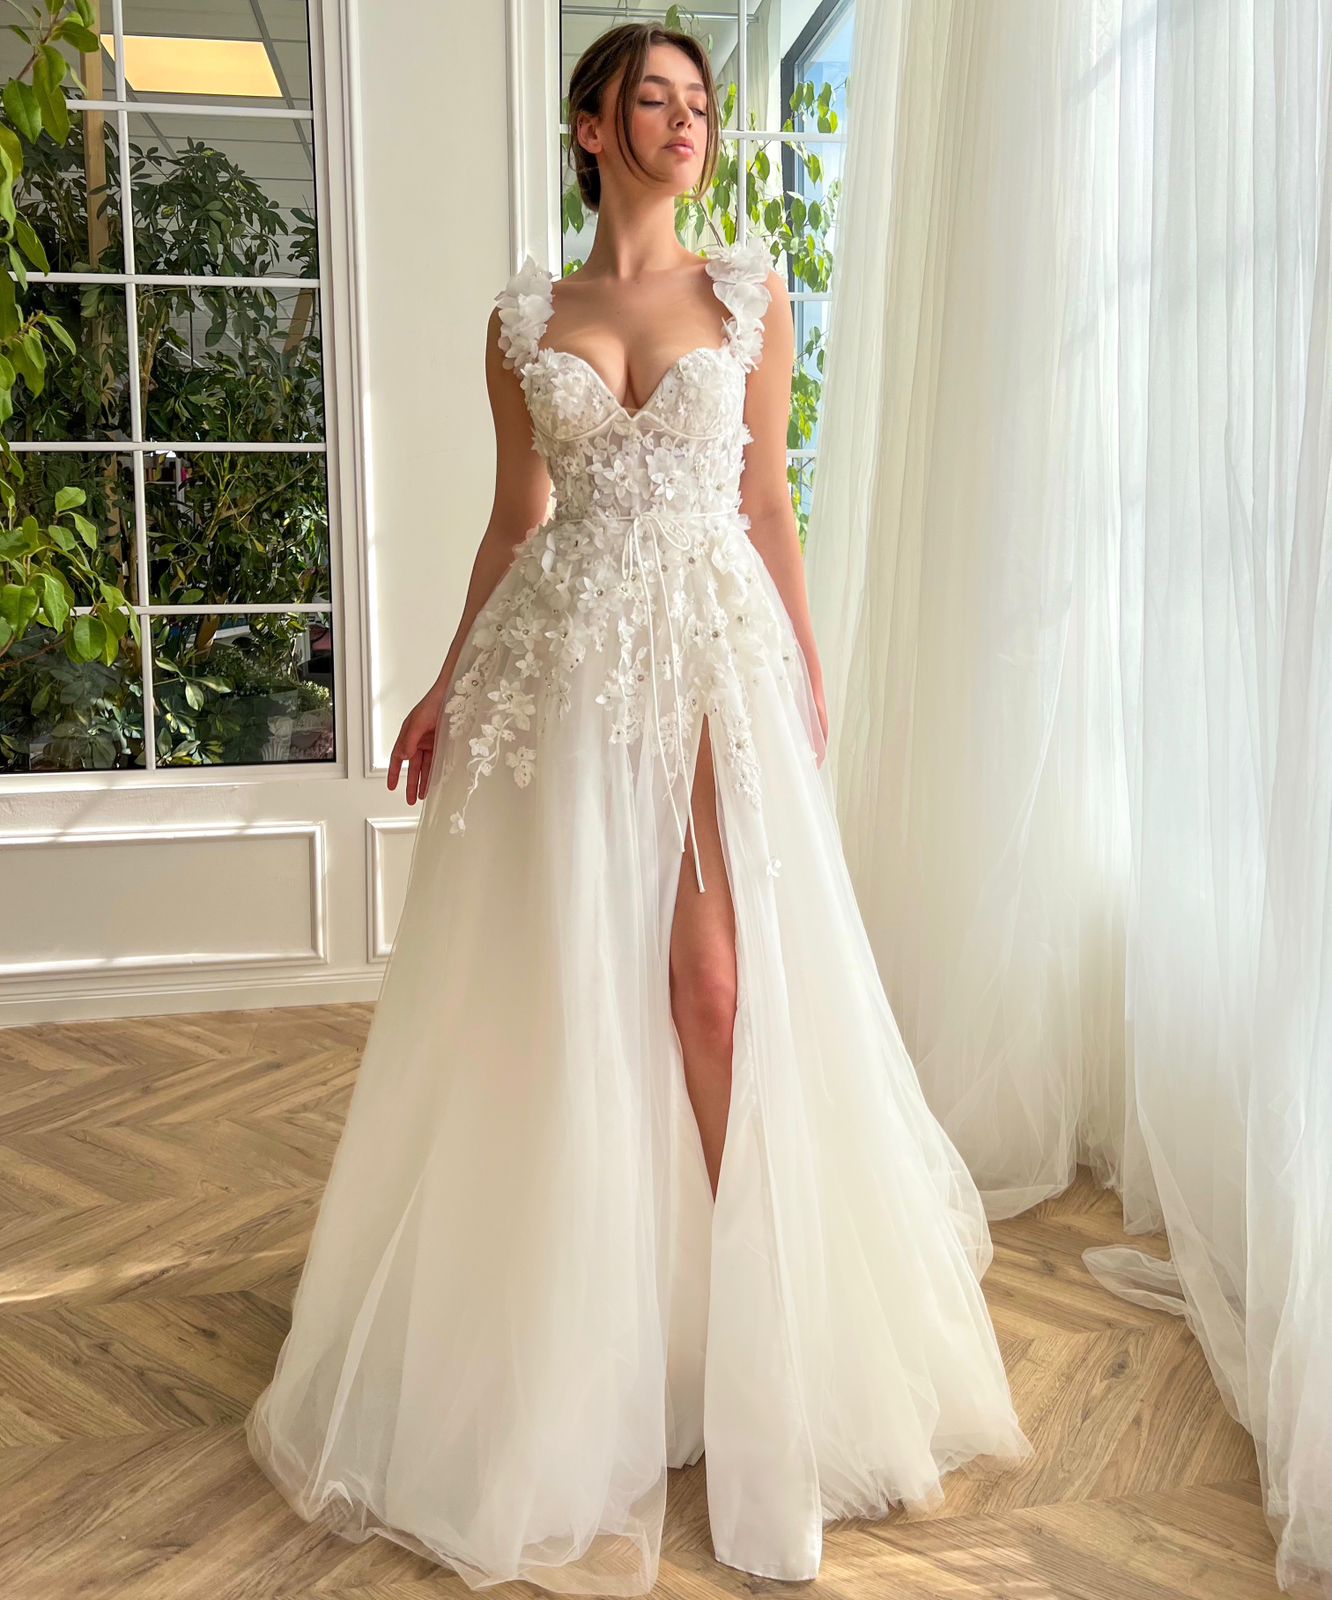 White A-Line bridal dress with straps, v-neck and embroidery